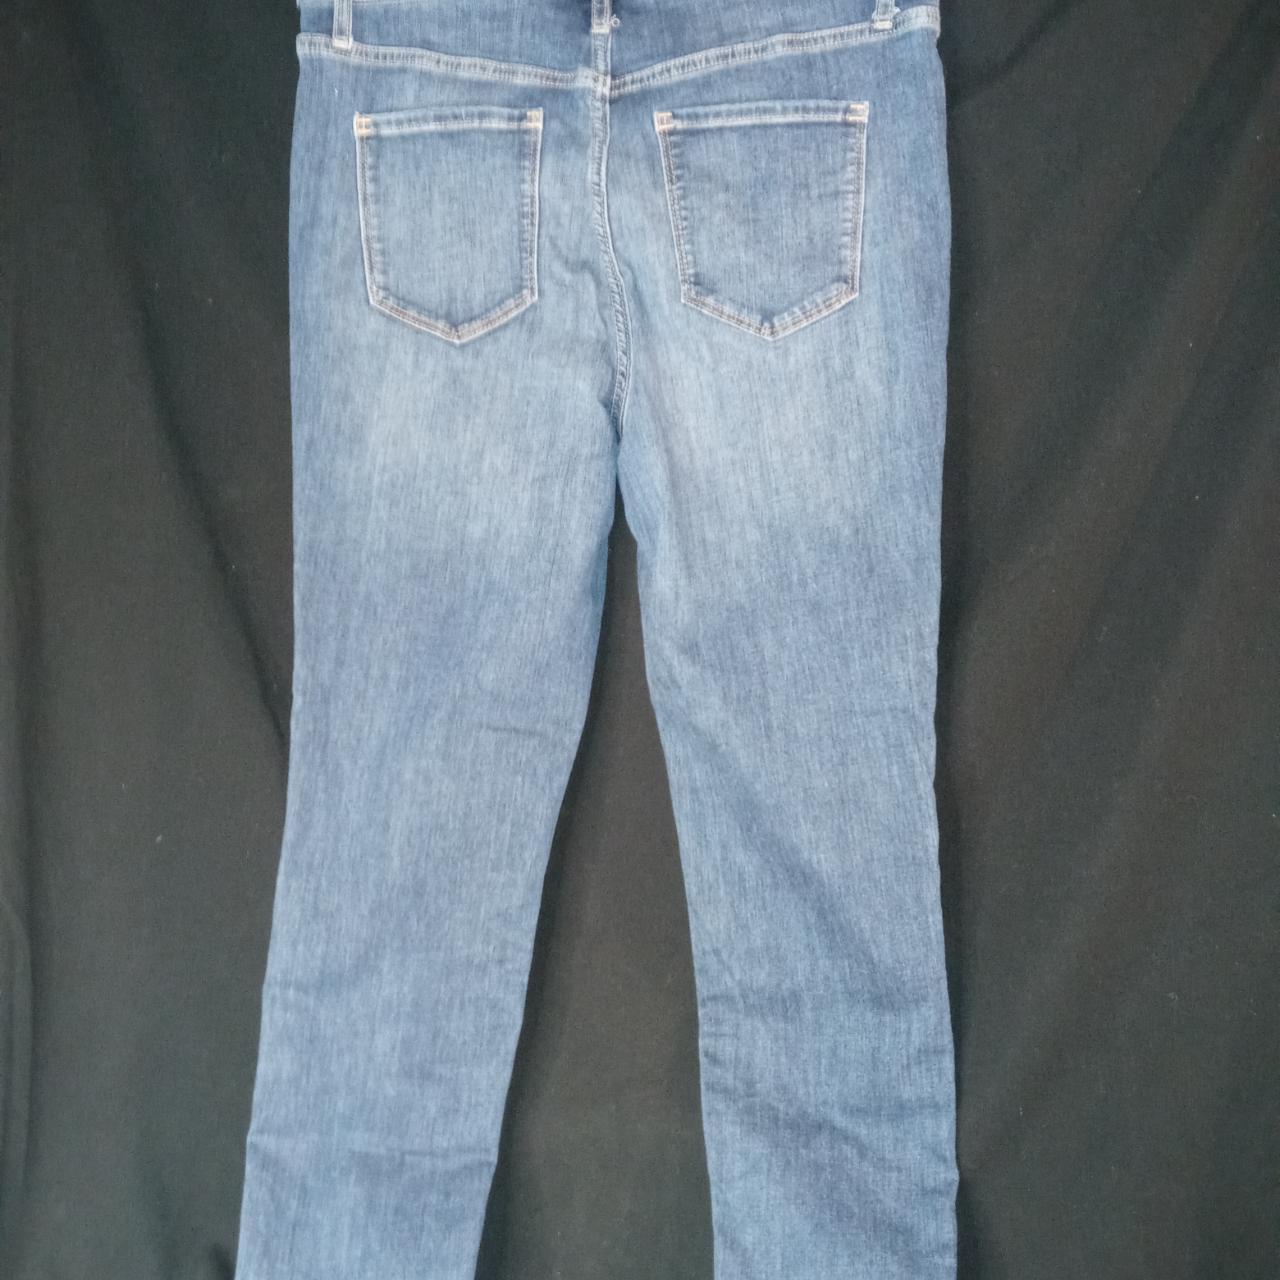 Simply Vera By Vera Wang Skinny Ankle Jeans Size - Depop